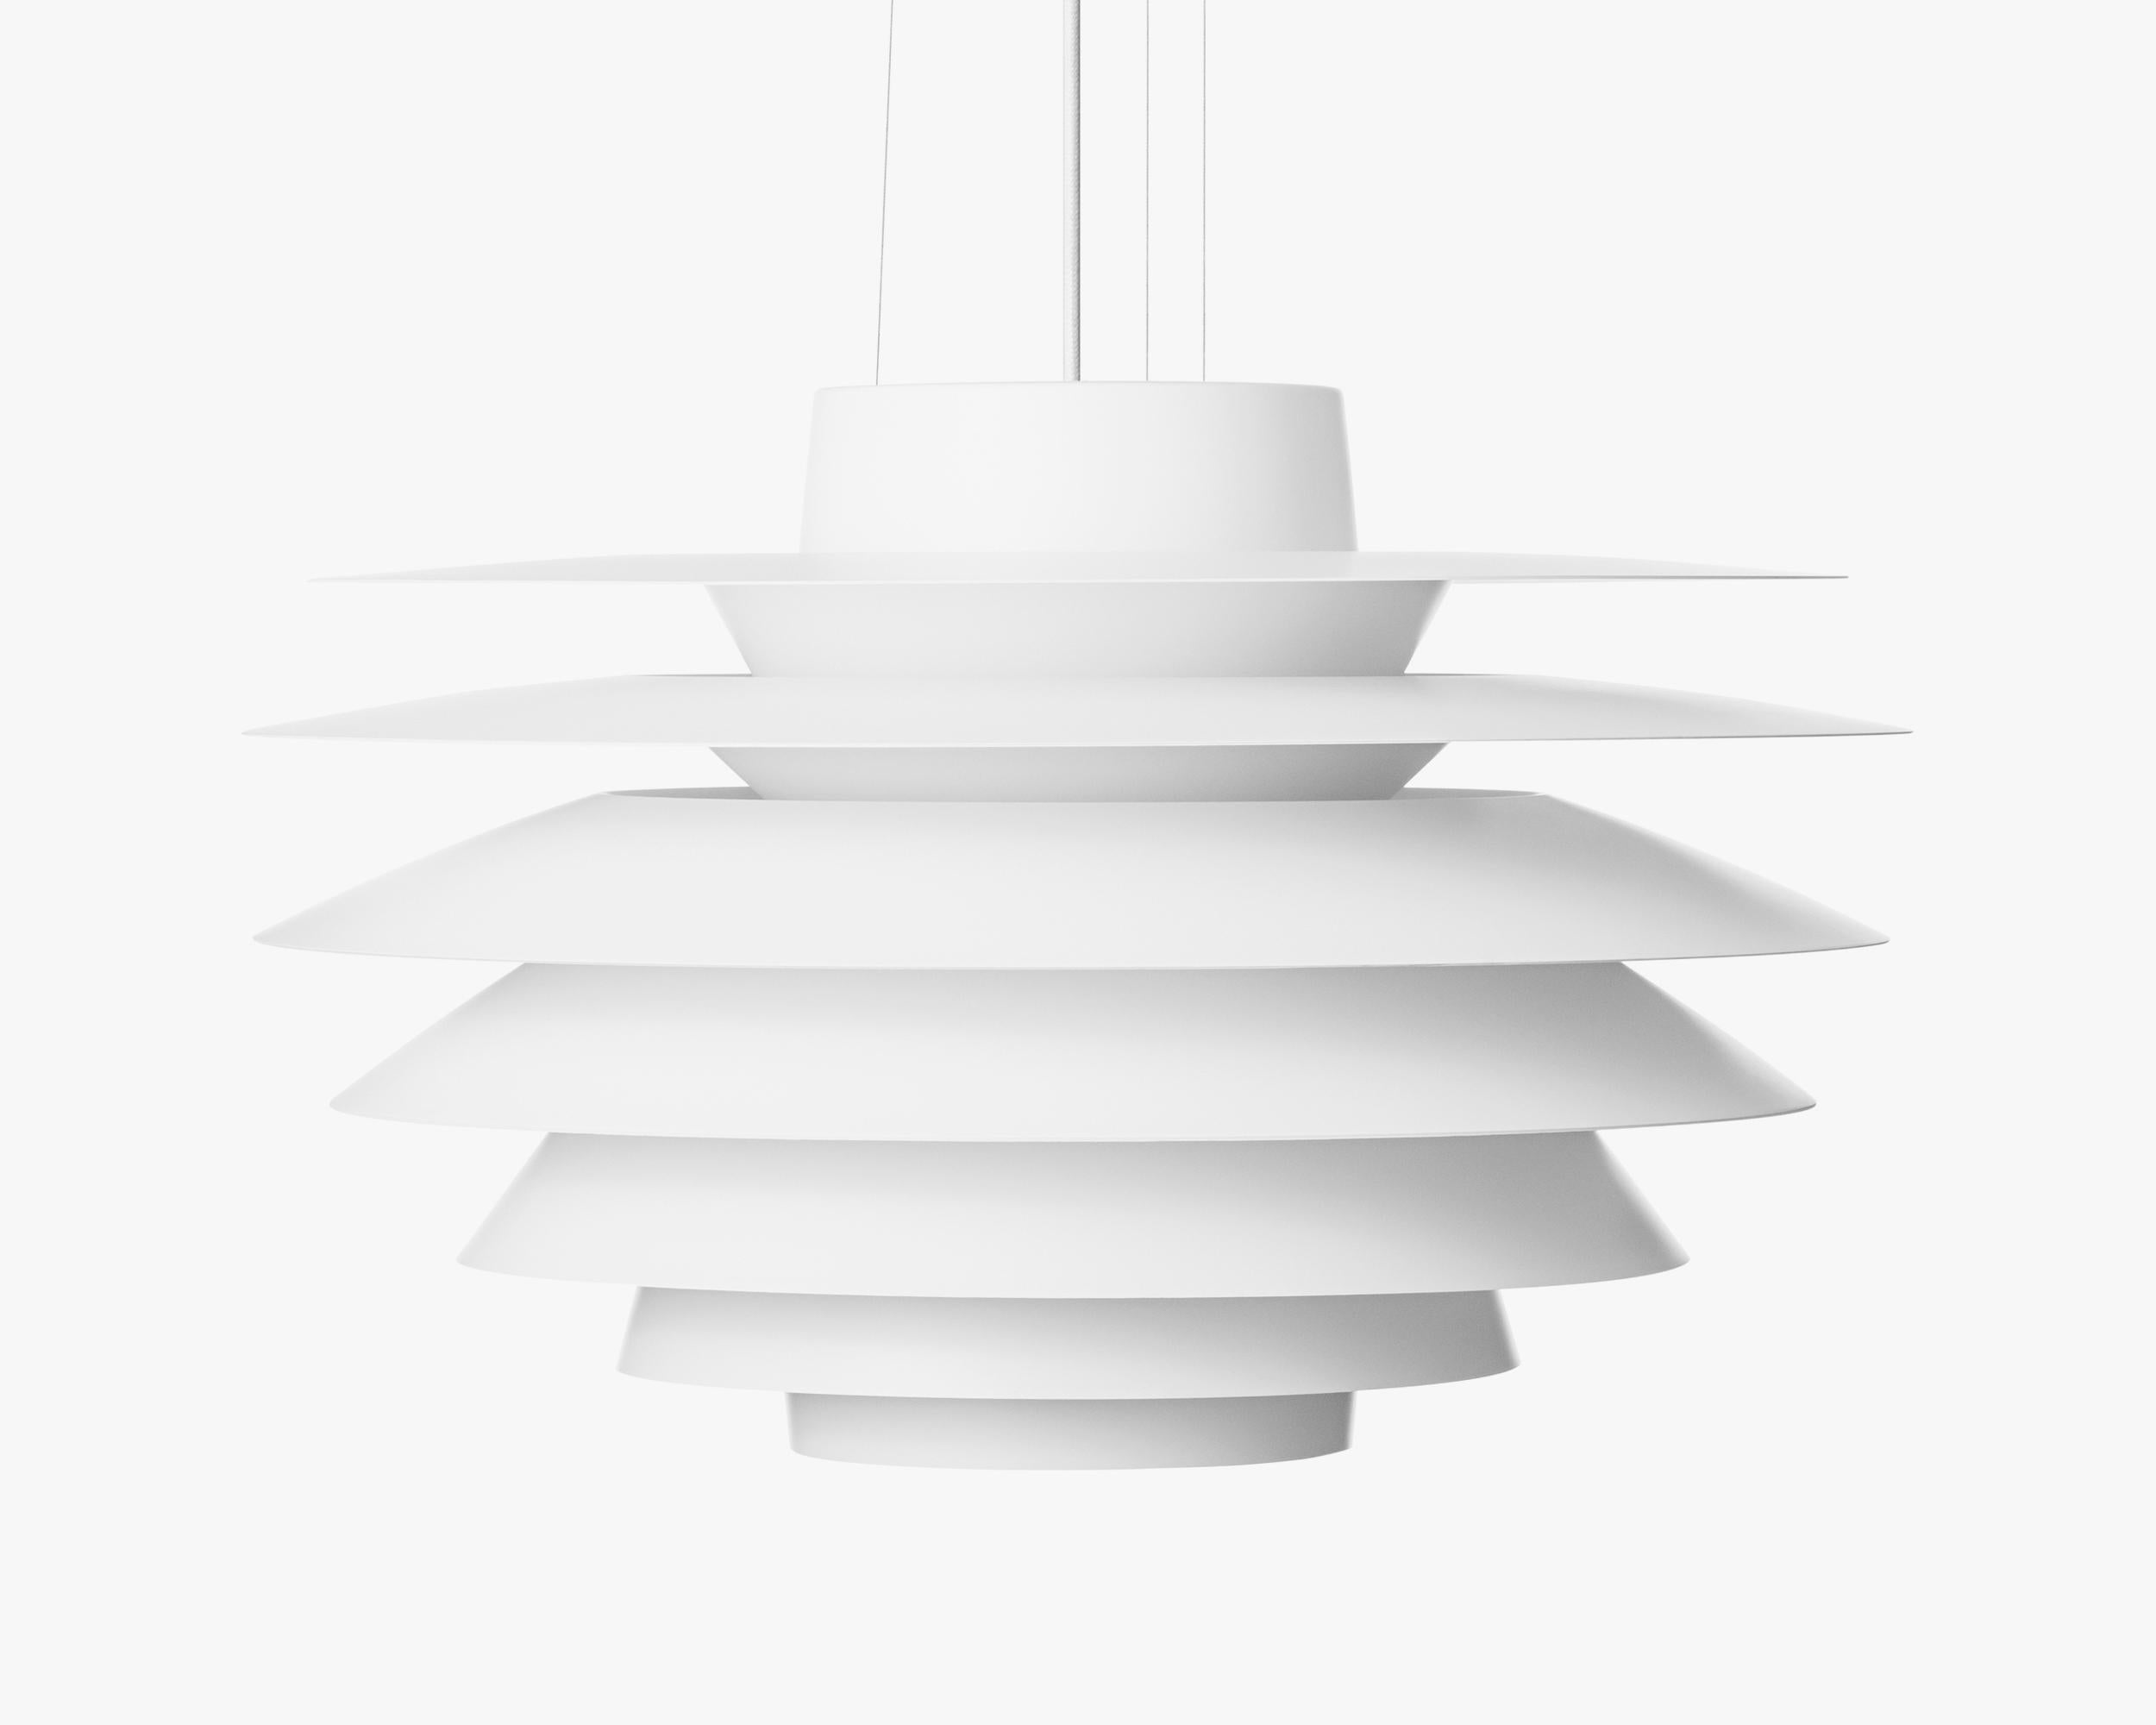 Pendant lamp Verona signed by Sven Middelboe for LYFA.
Official new edition

Textile wire (white) 300cm
Bulb: E27 max60W (110V-230V)

Matt printed aluminum

Sizes available:
D 175 mm – H 125 mm
D 250 mm – H 174 mm
D 320 mm – H 221 mm
D